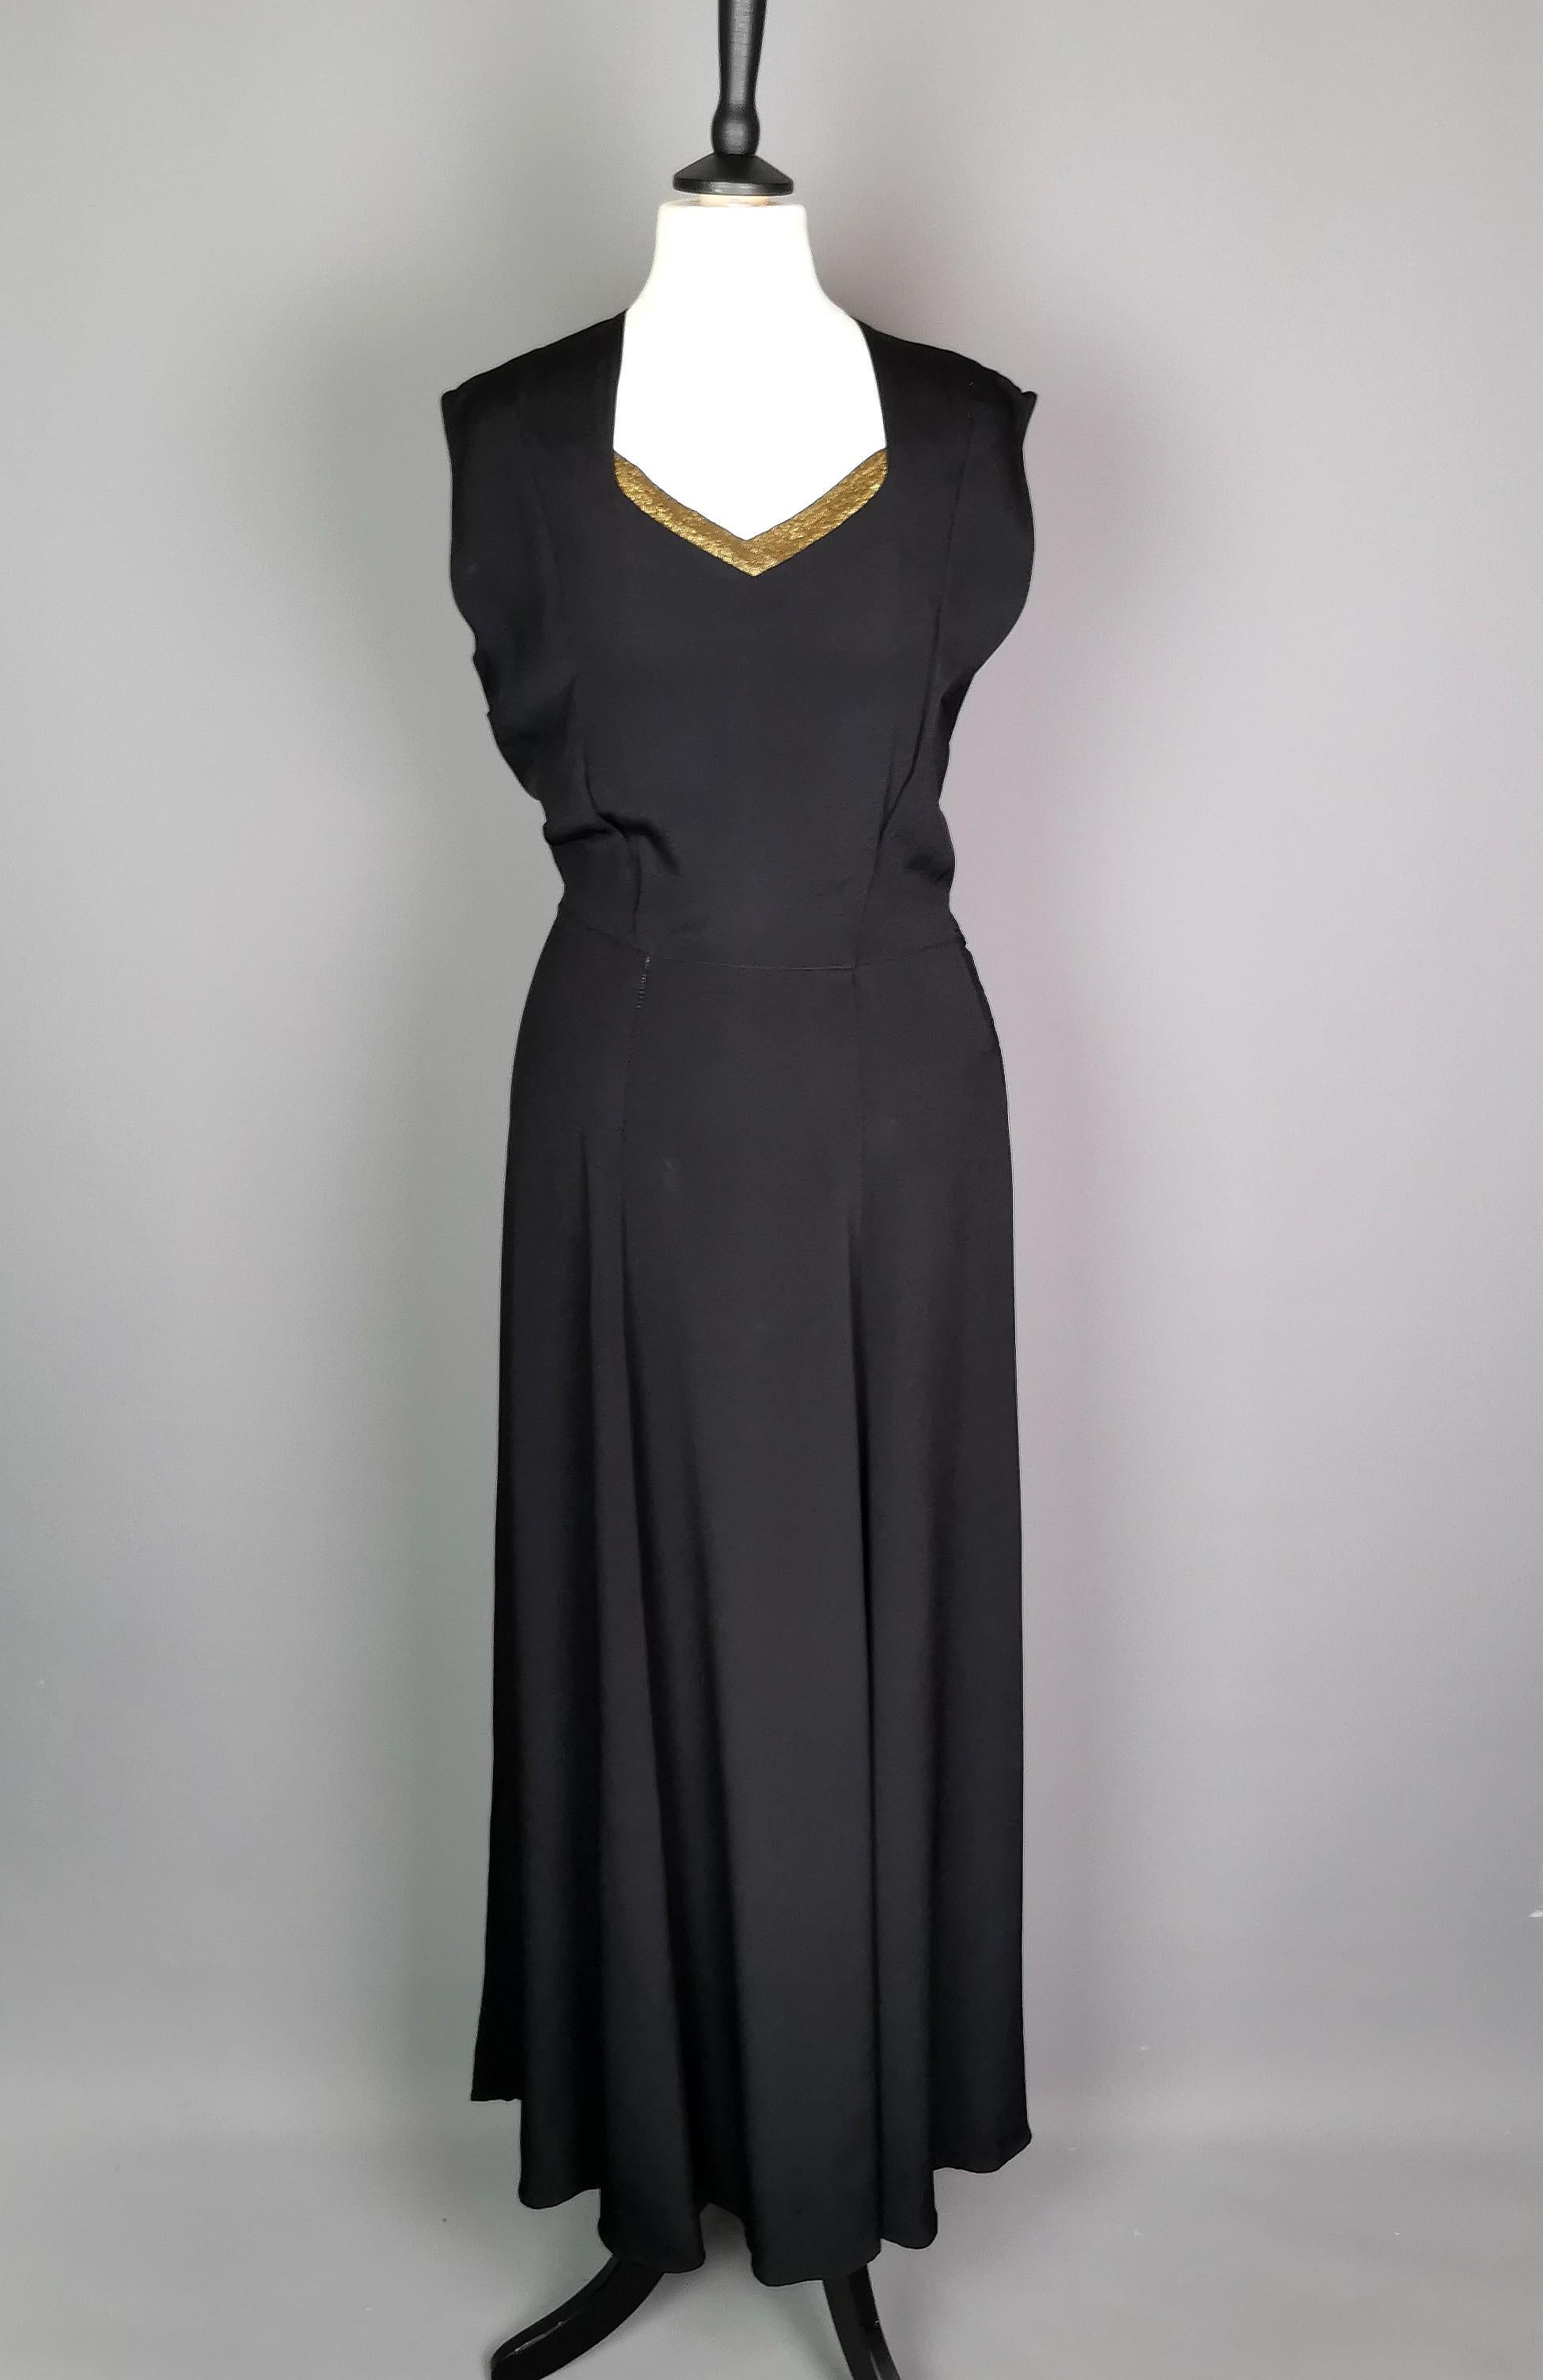 Women's Vintage 1930s Black rayon crepe bombshell dress, gold lame, evening gown  For Sale